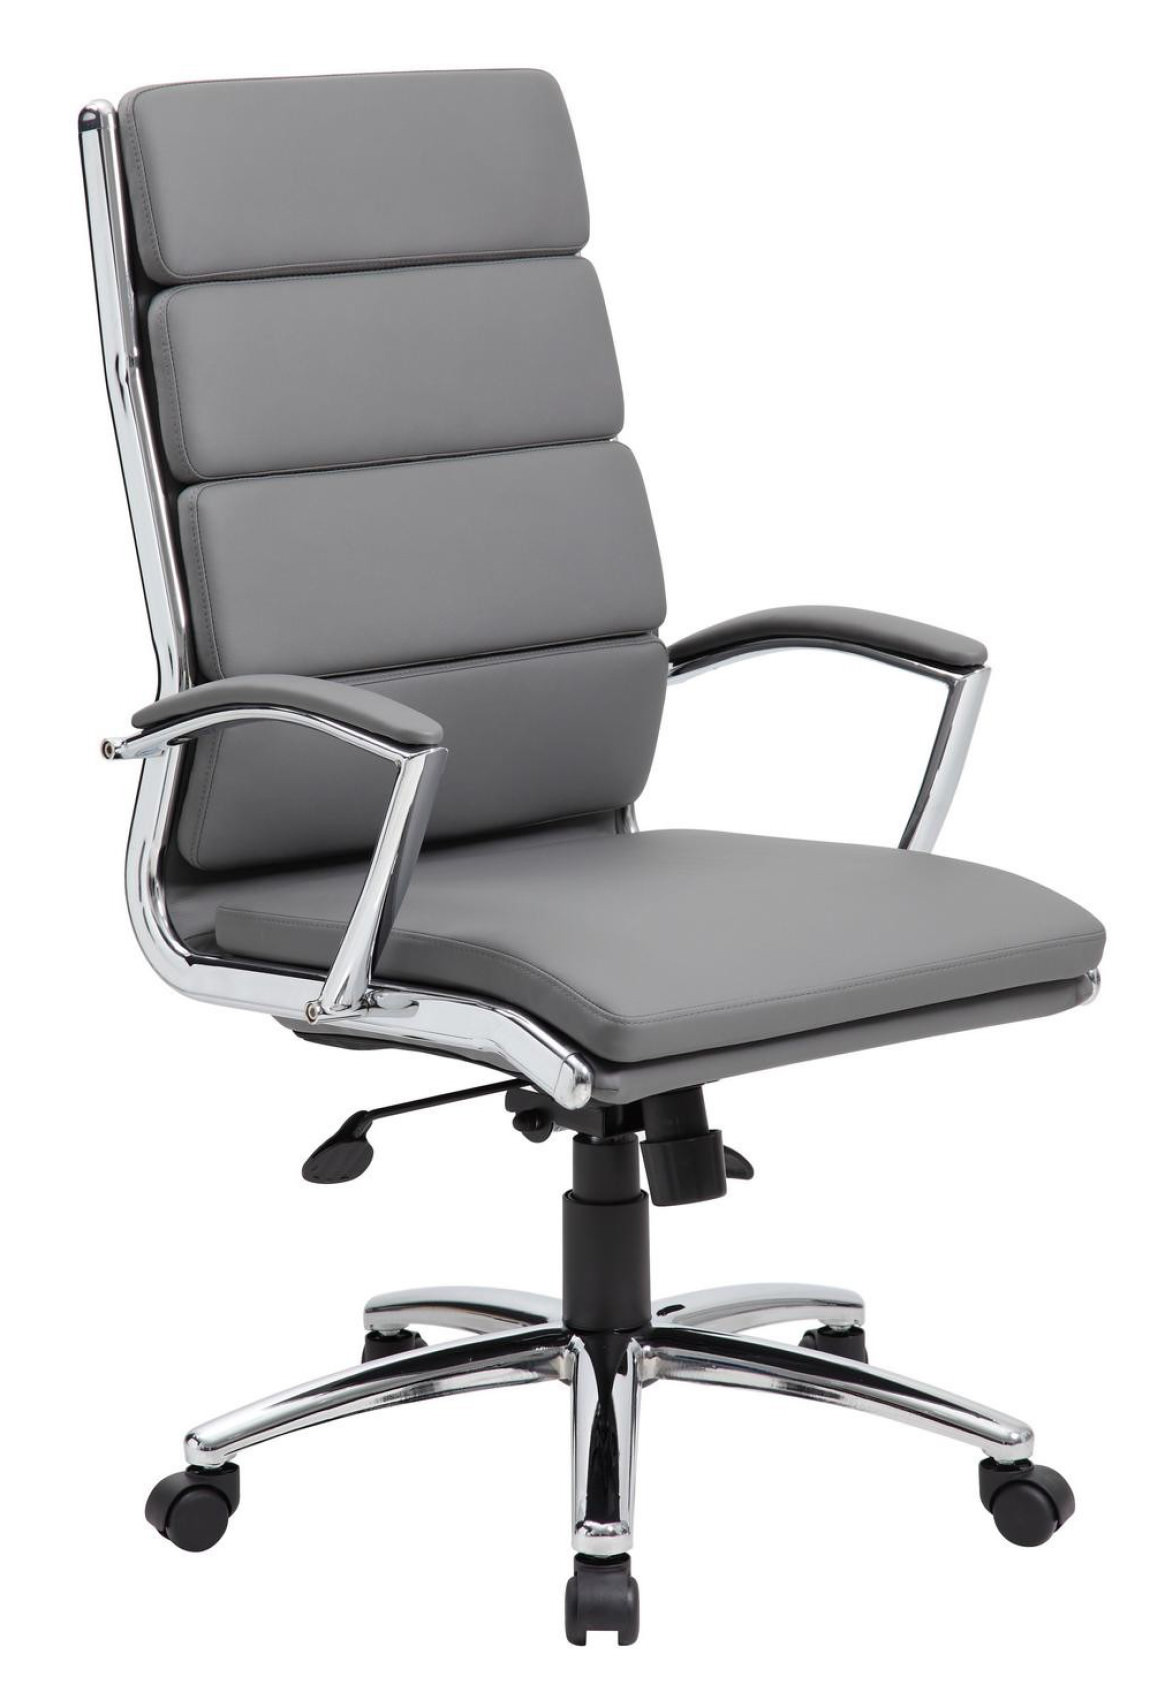 Modern High Back Gray Conference Room Chair : Express Office Furniture